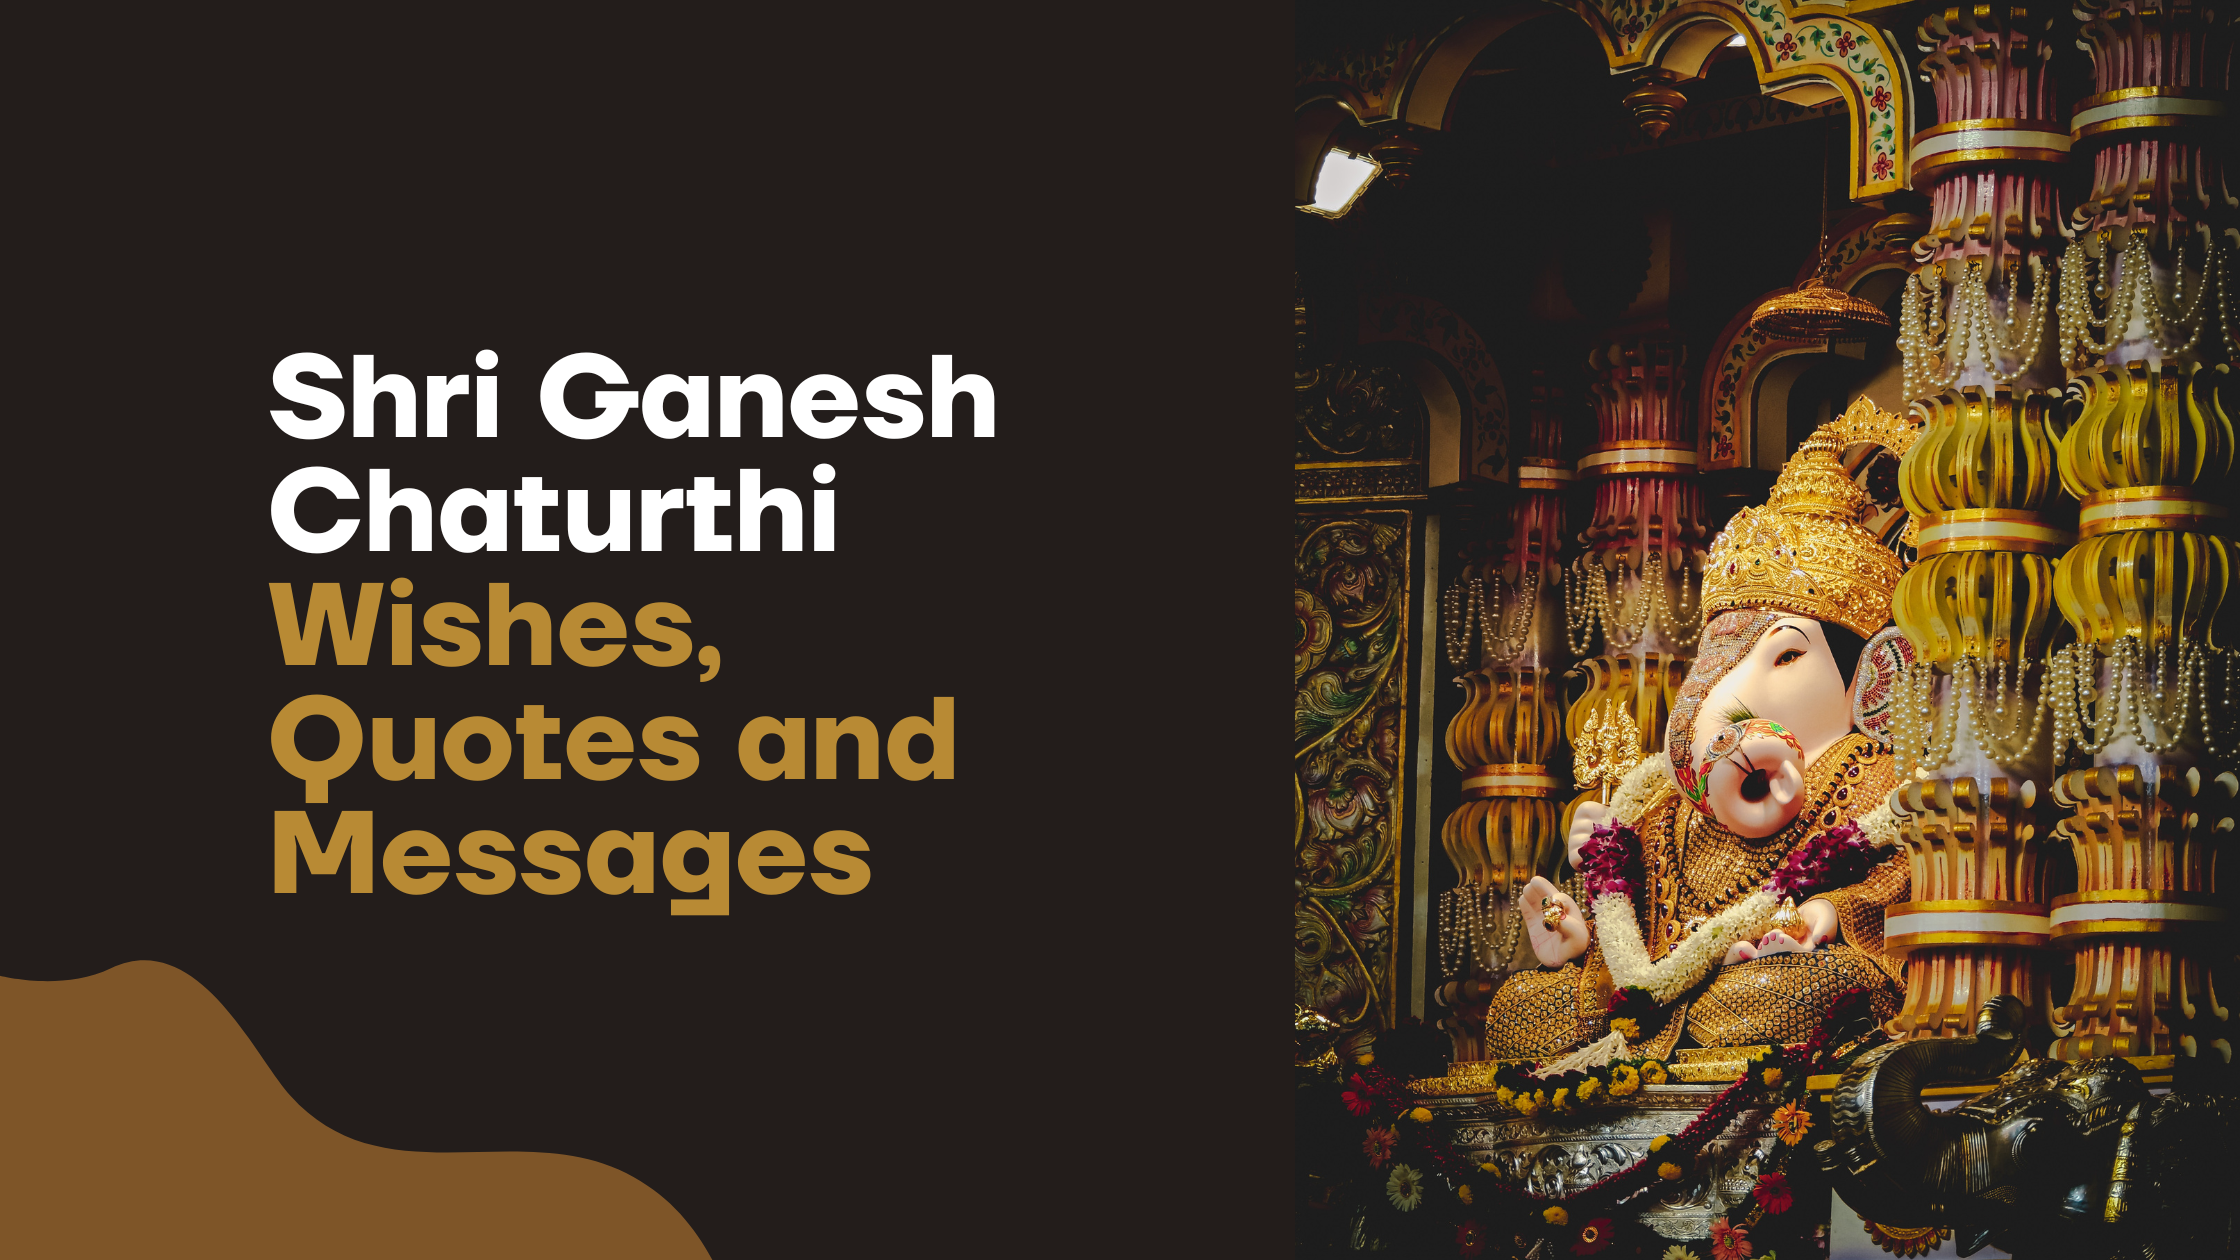 Shri Ganesh Chaturthi wishes, quotes and messages Lord Ganesha